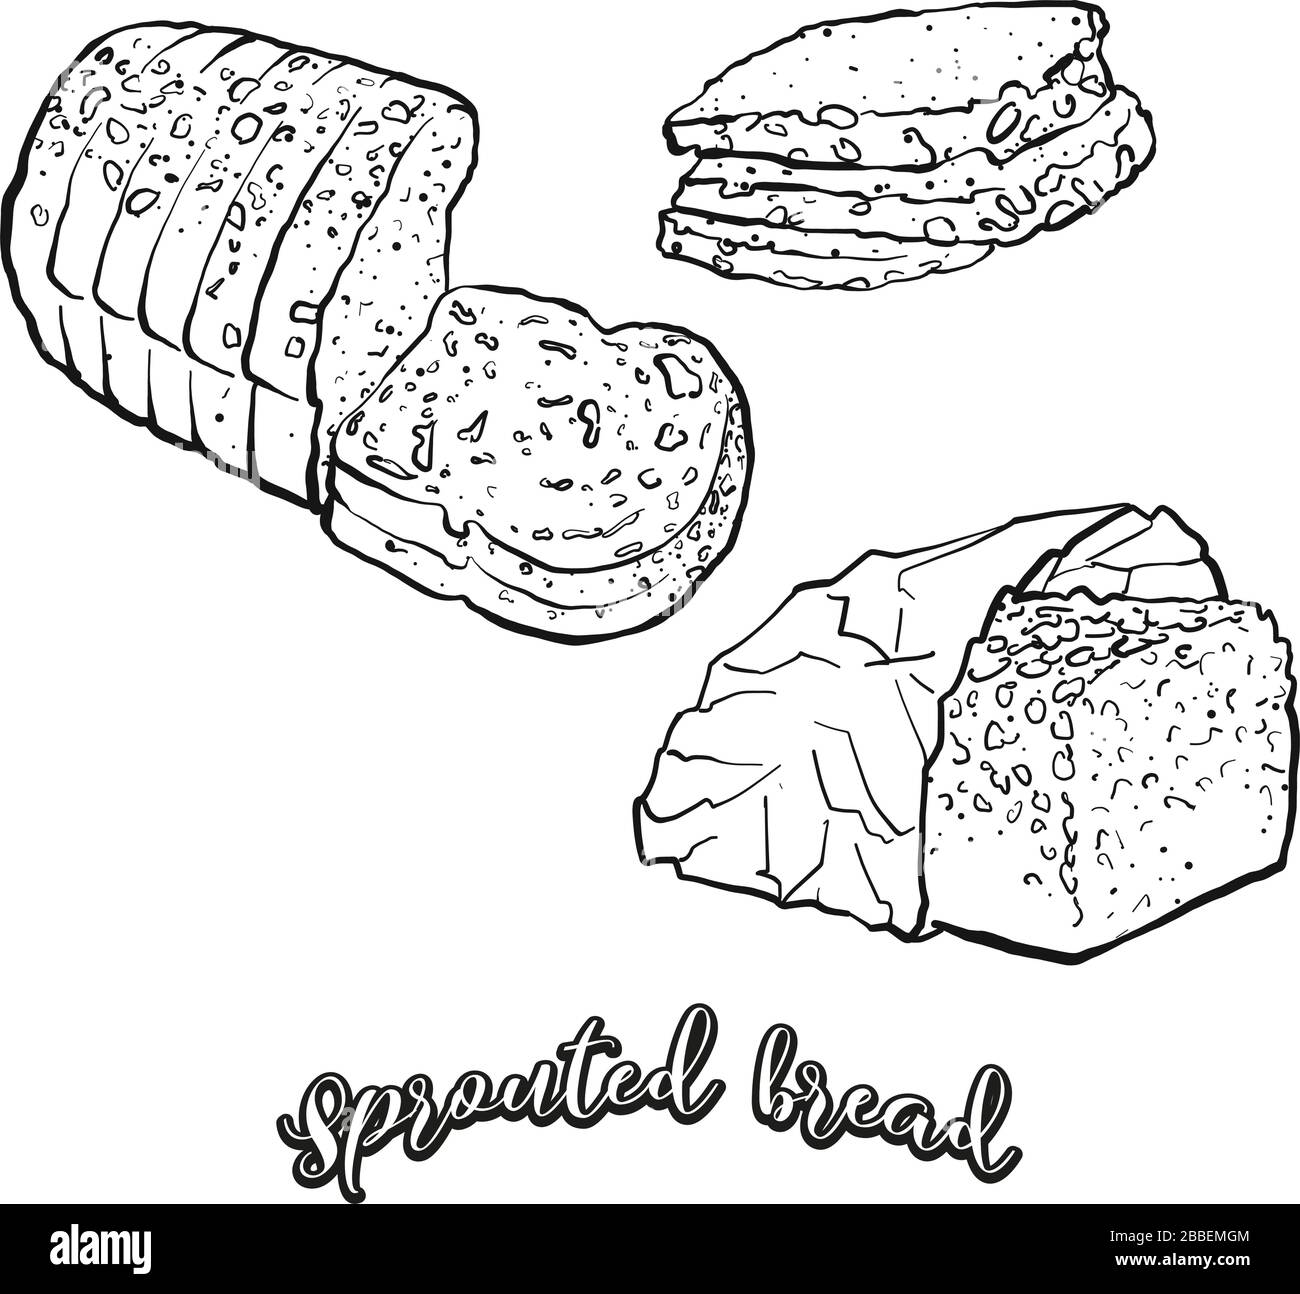 Sprouted bread food sketch separated on white. Vector drawing of Sprouted, usually known in Europe. Food illustration series. Stock Vector